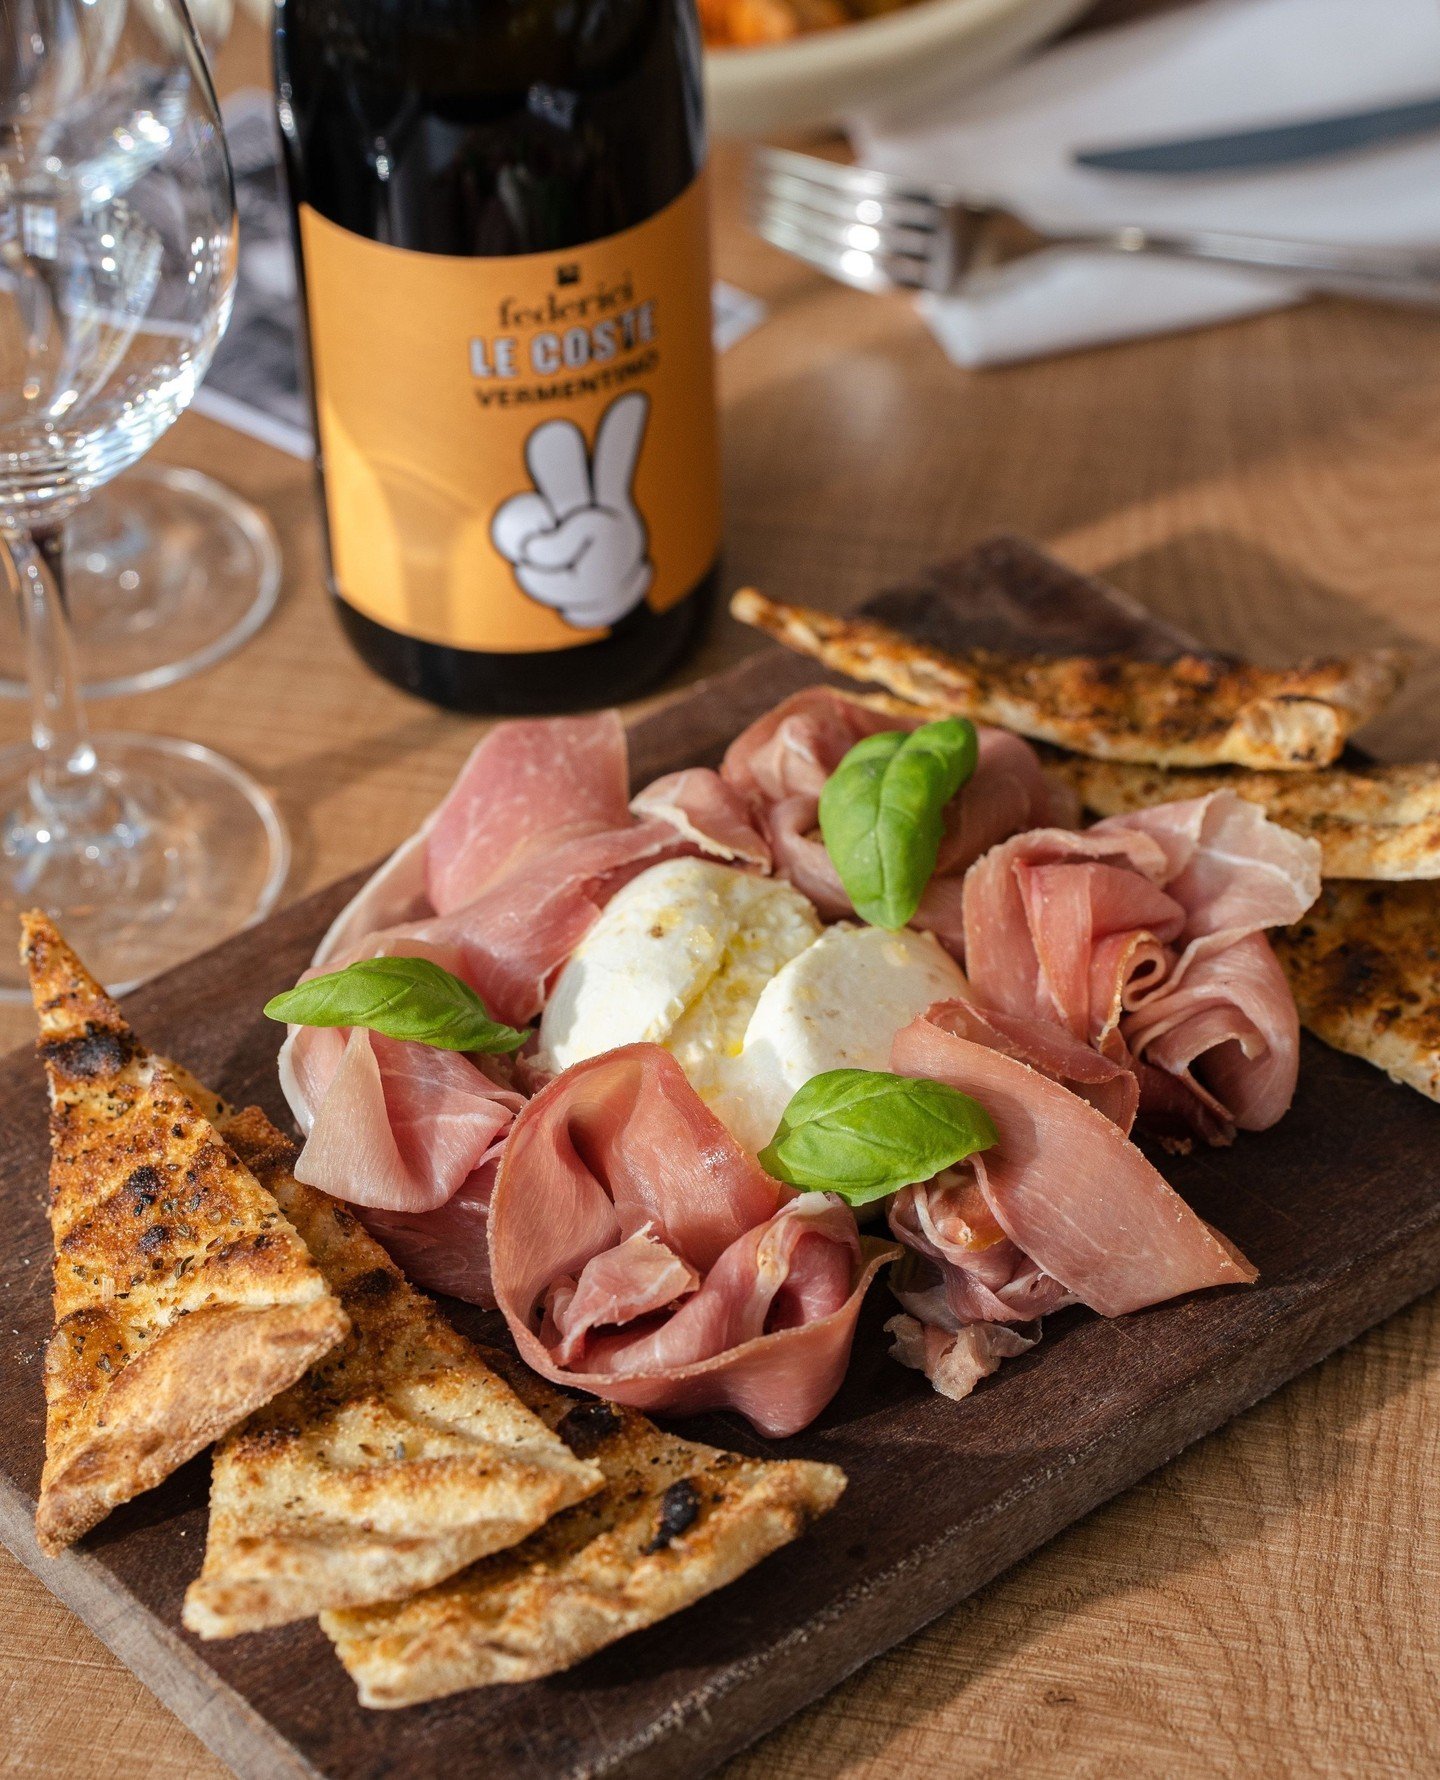 Burrata, prosciutto, and a bottle of wine is the perfect recipe to the start of a great night.⁠
⁠
When bottles are 50% off on Tuesdays and Wednesdays there's only one right thing to do. ⁠
⁠
Enjoy it with our weekly special and with a special person i